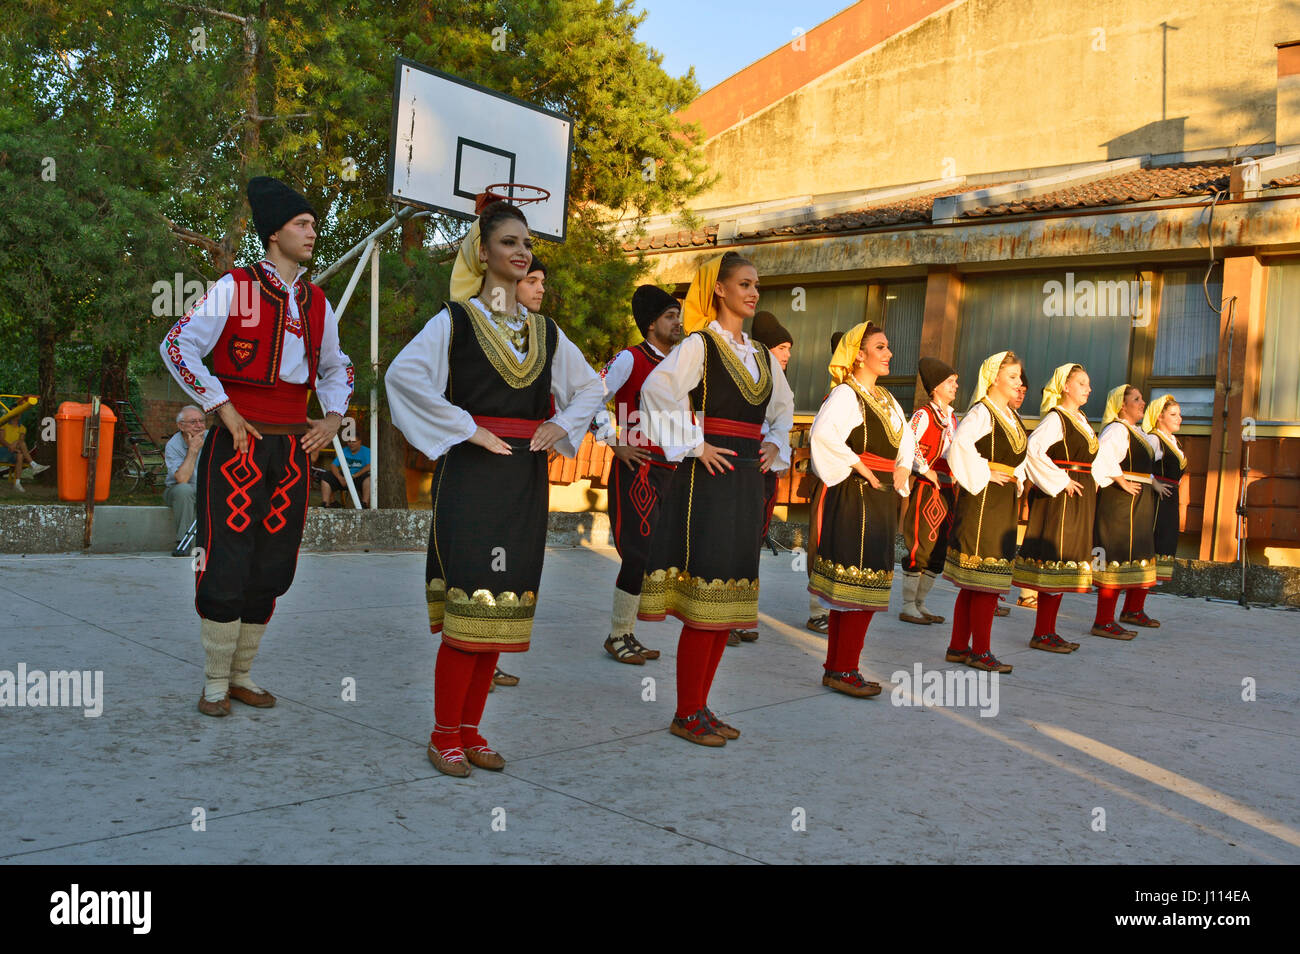 Ivanovo, Serbia, August 15, 2016. The group of young people dancing traditional folk dances from the region of Serbia. Stock Photo